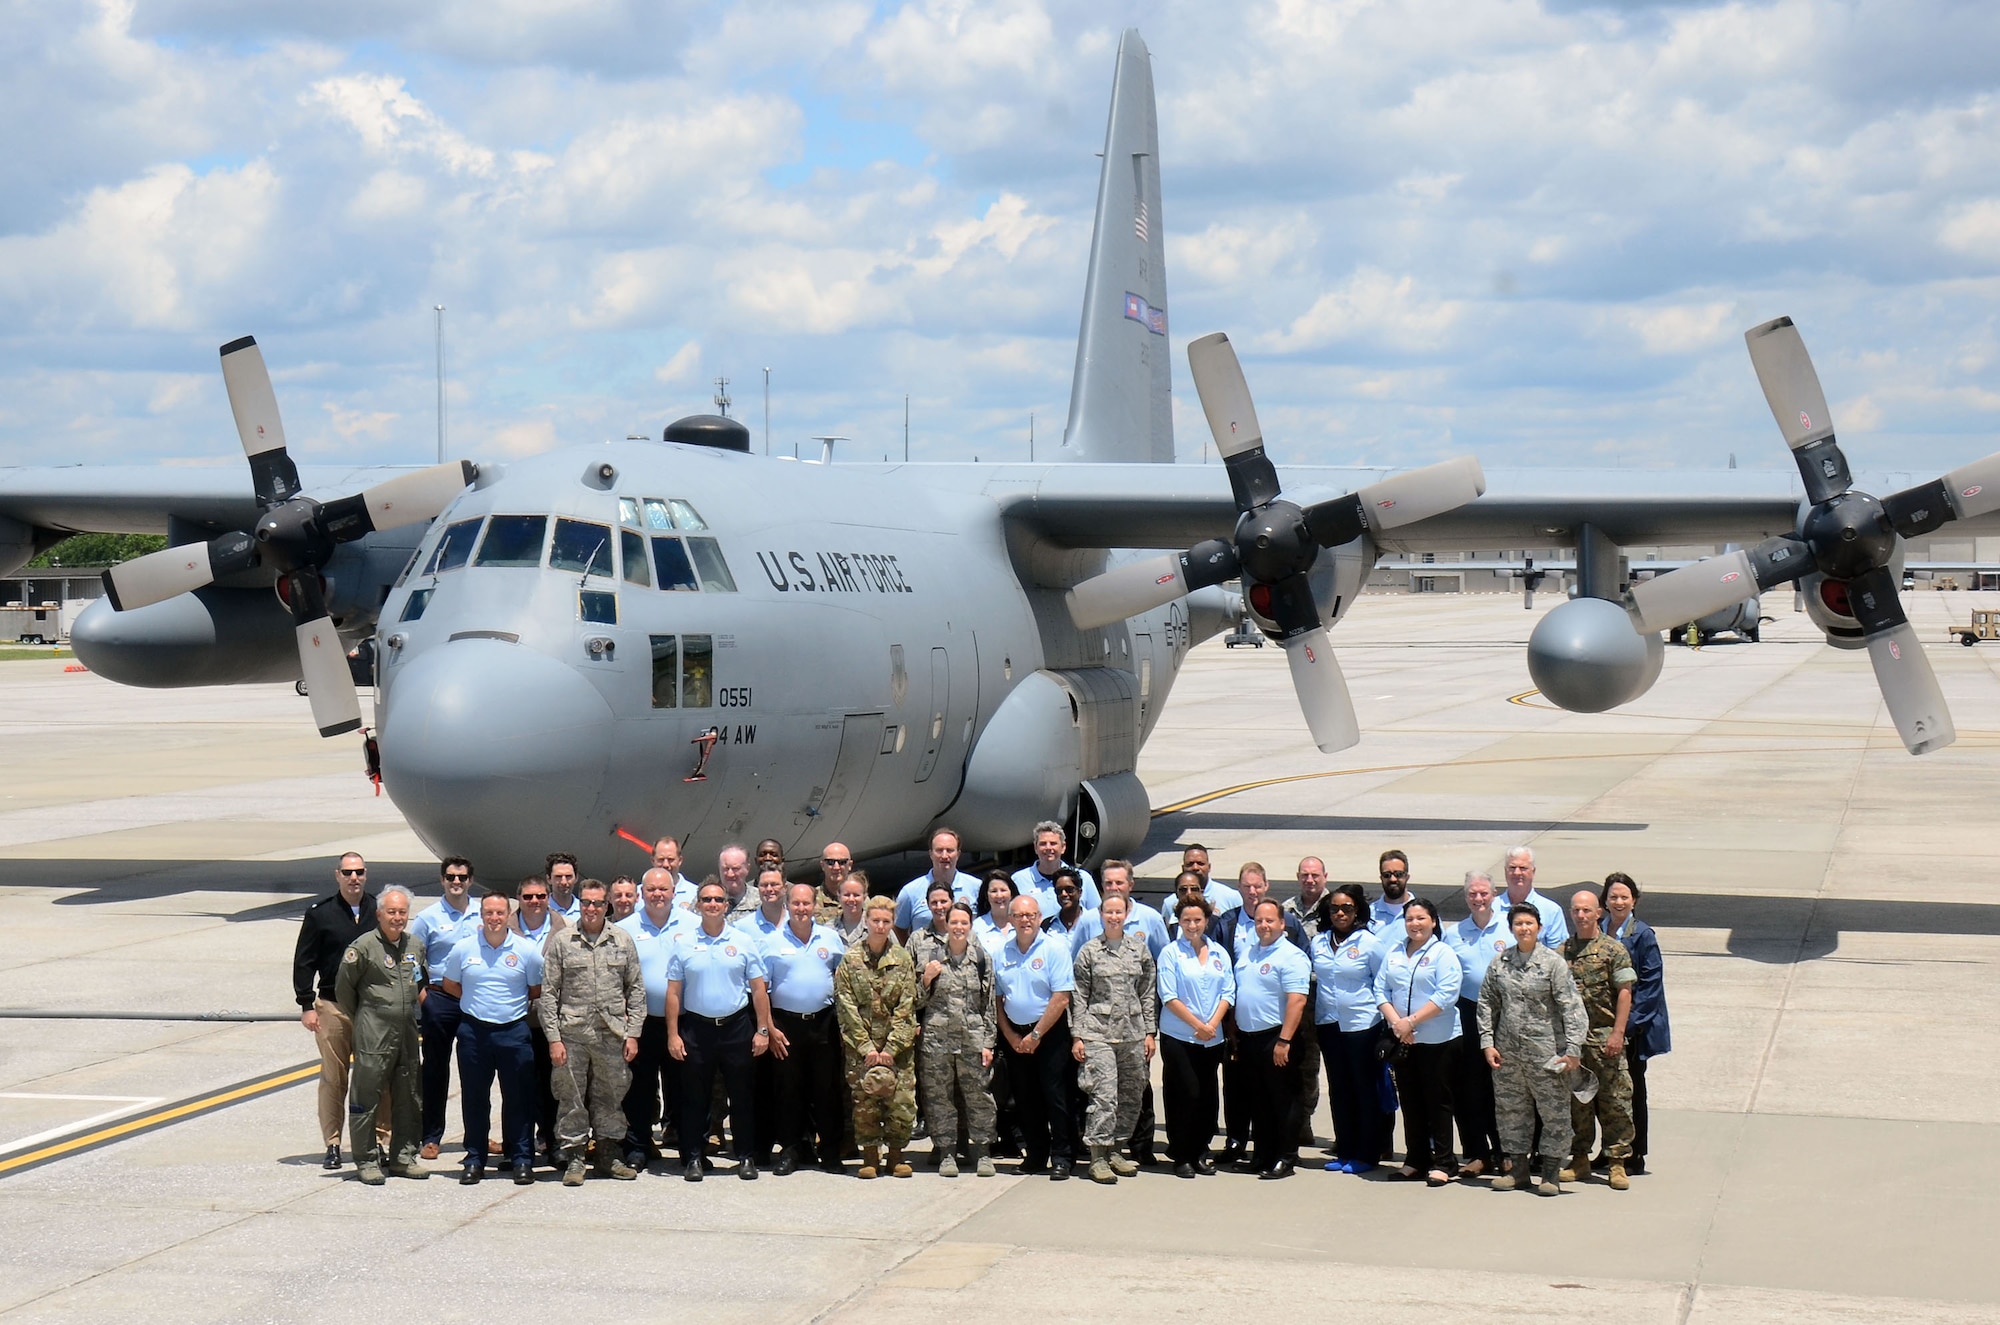 Members of the Honorary Commanders Association Class of 2017 explore various missions and training facilities at Dobbins Air Reserve Base, Georgia May 25, 2017. The HCA annually selects community and business leaders and pairs them with military commanders in a yearlong program, giving the leaders the opportunity to learn more about local military activities, their impact on our economy and various aspects of the national defense system. (U.S. Air Force photo/Don Peek)